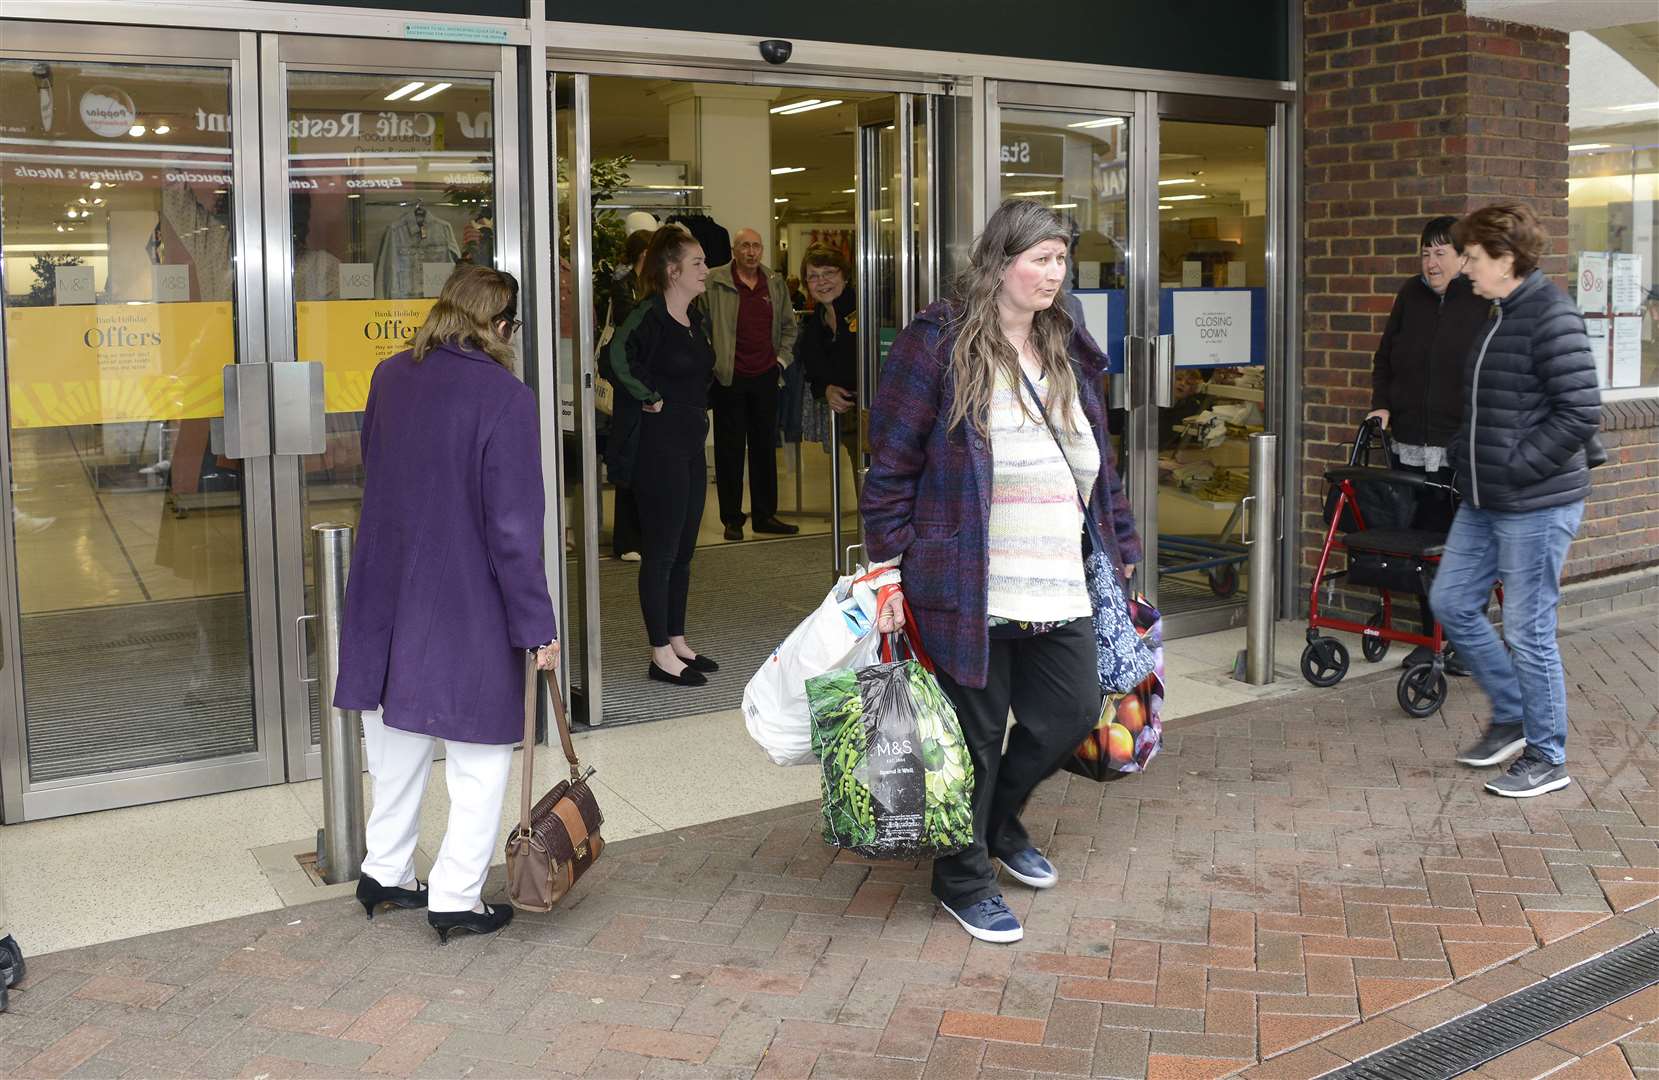 One of the last shoppers, Colette Post, leaves with full bags in 2019